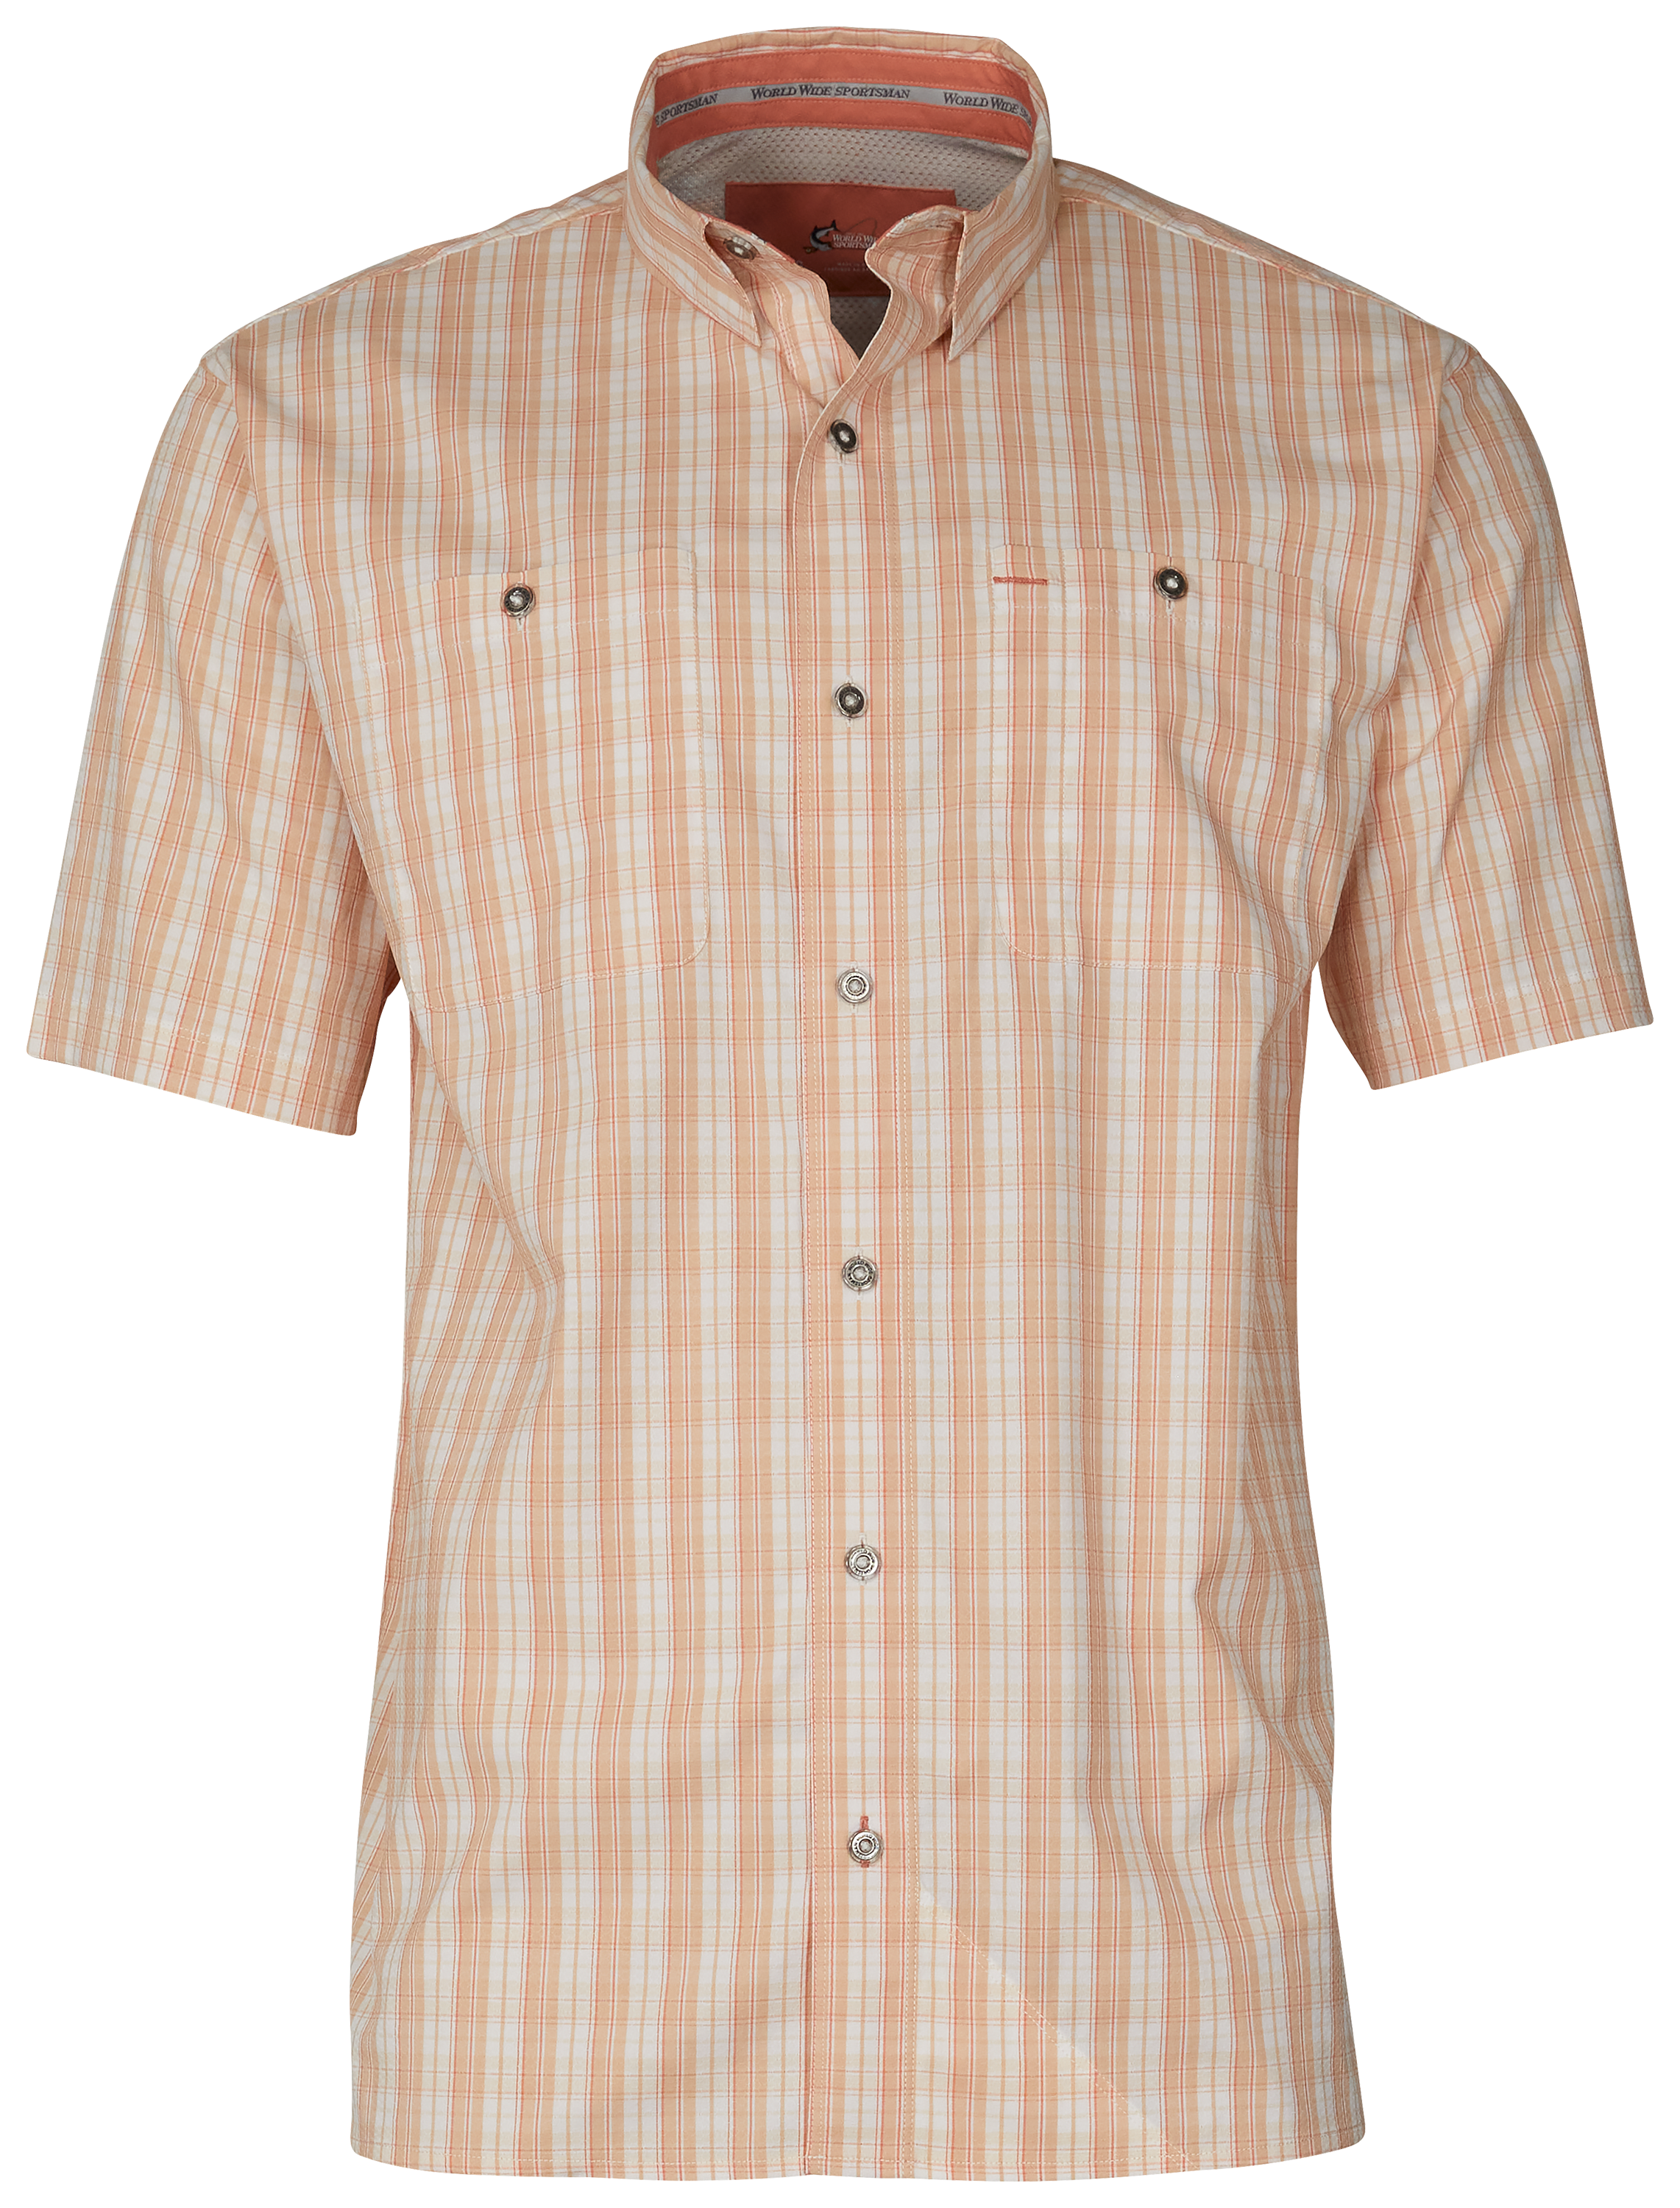 World Wide Sportsman Ultimate Angler Plaid Short-Sleeve Shirt for Men - Almost Apricot Plaid - S